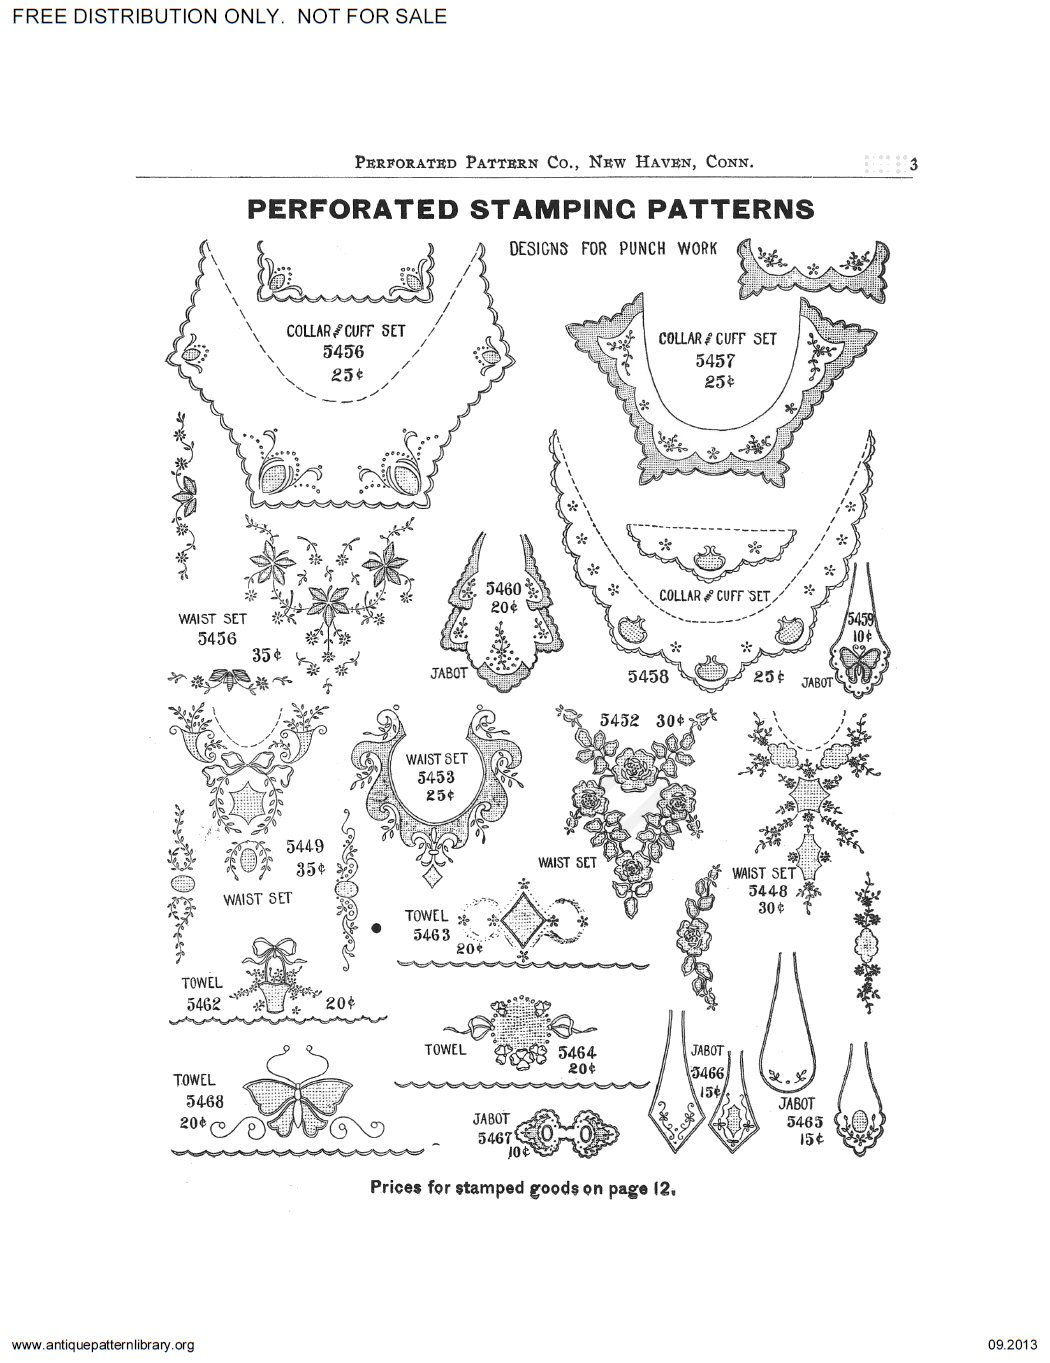 D-LP001 Perforated Stamping Patterns